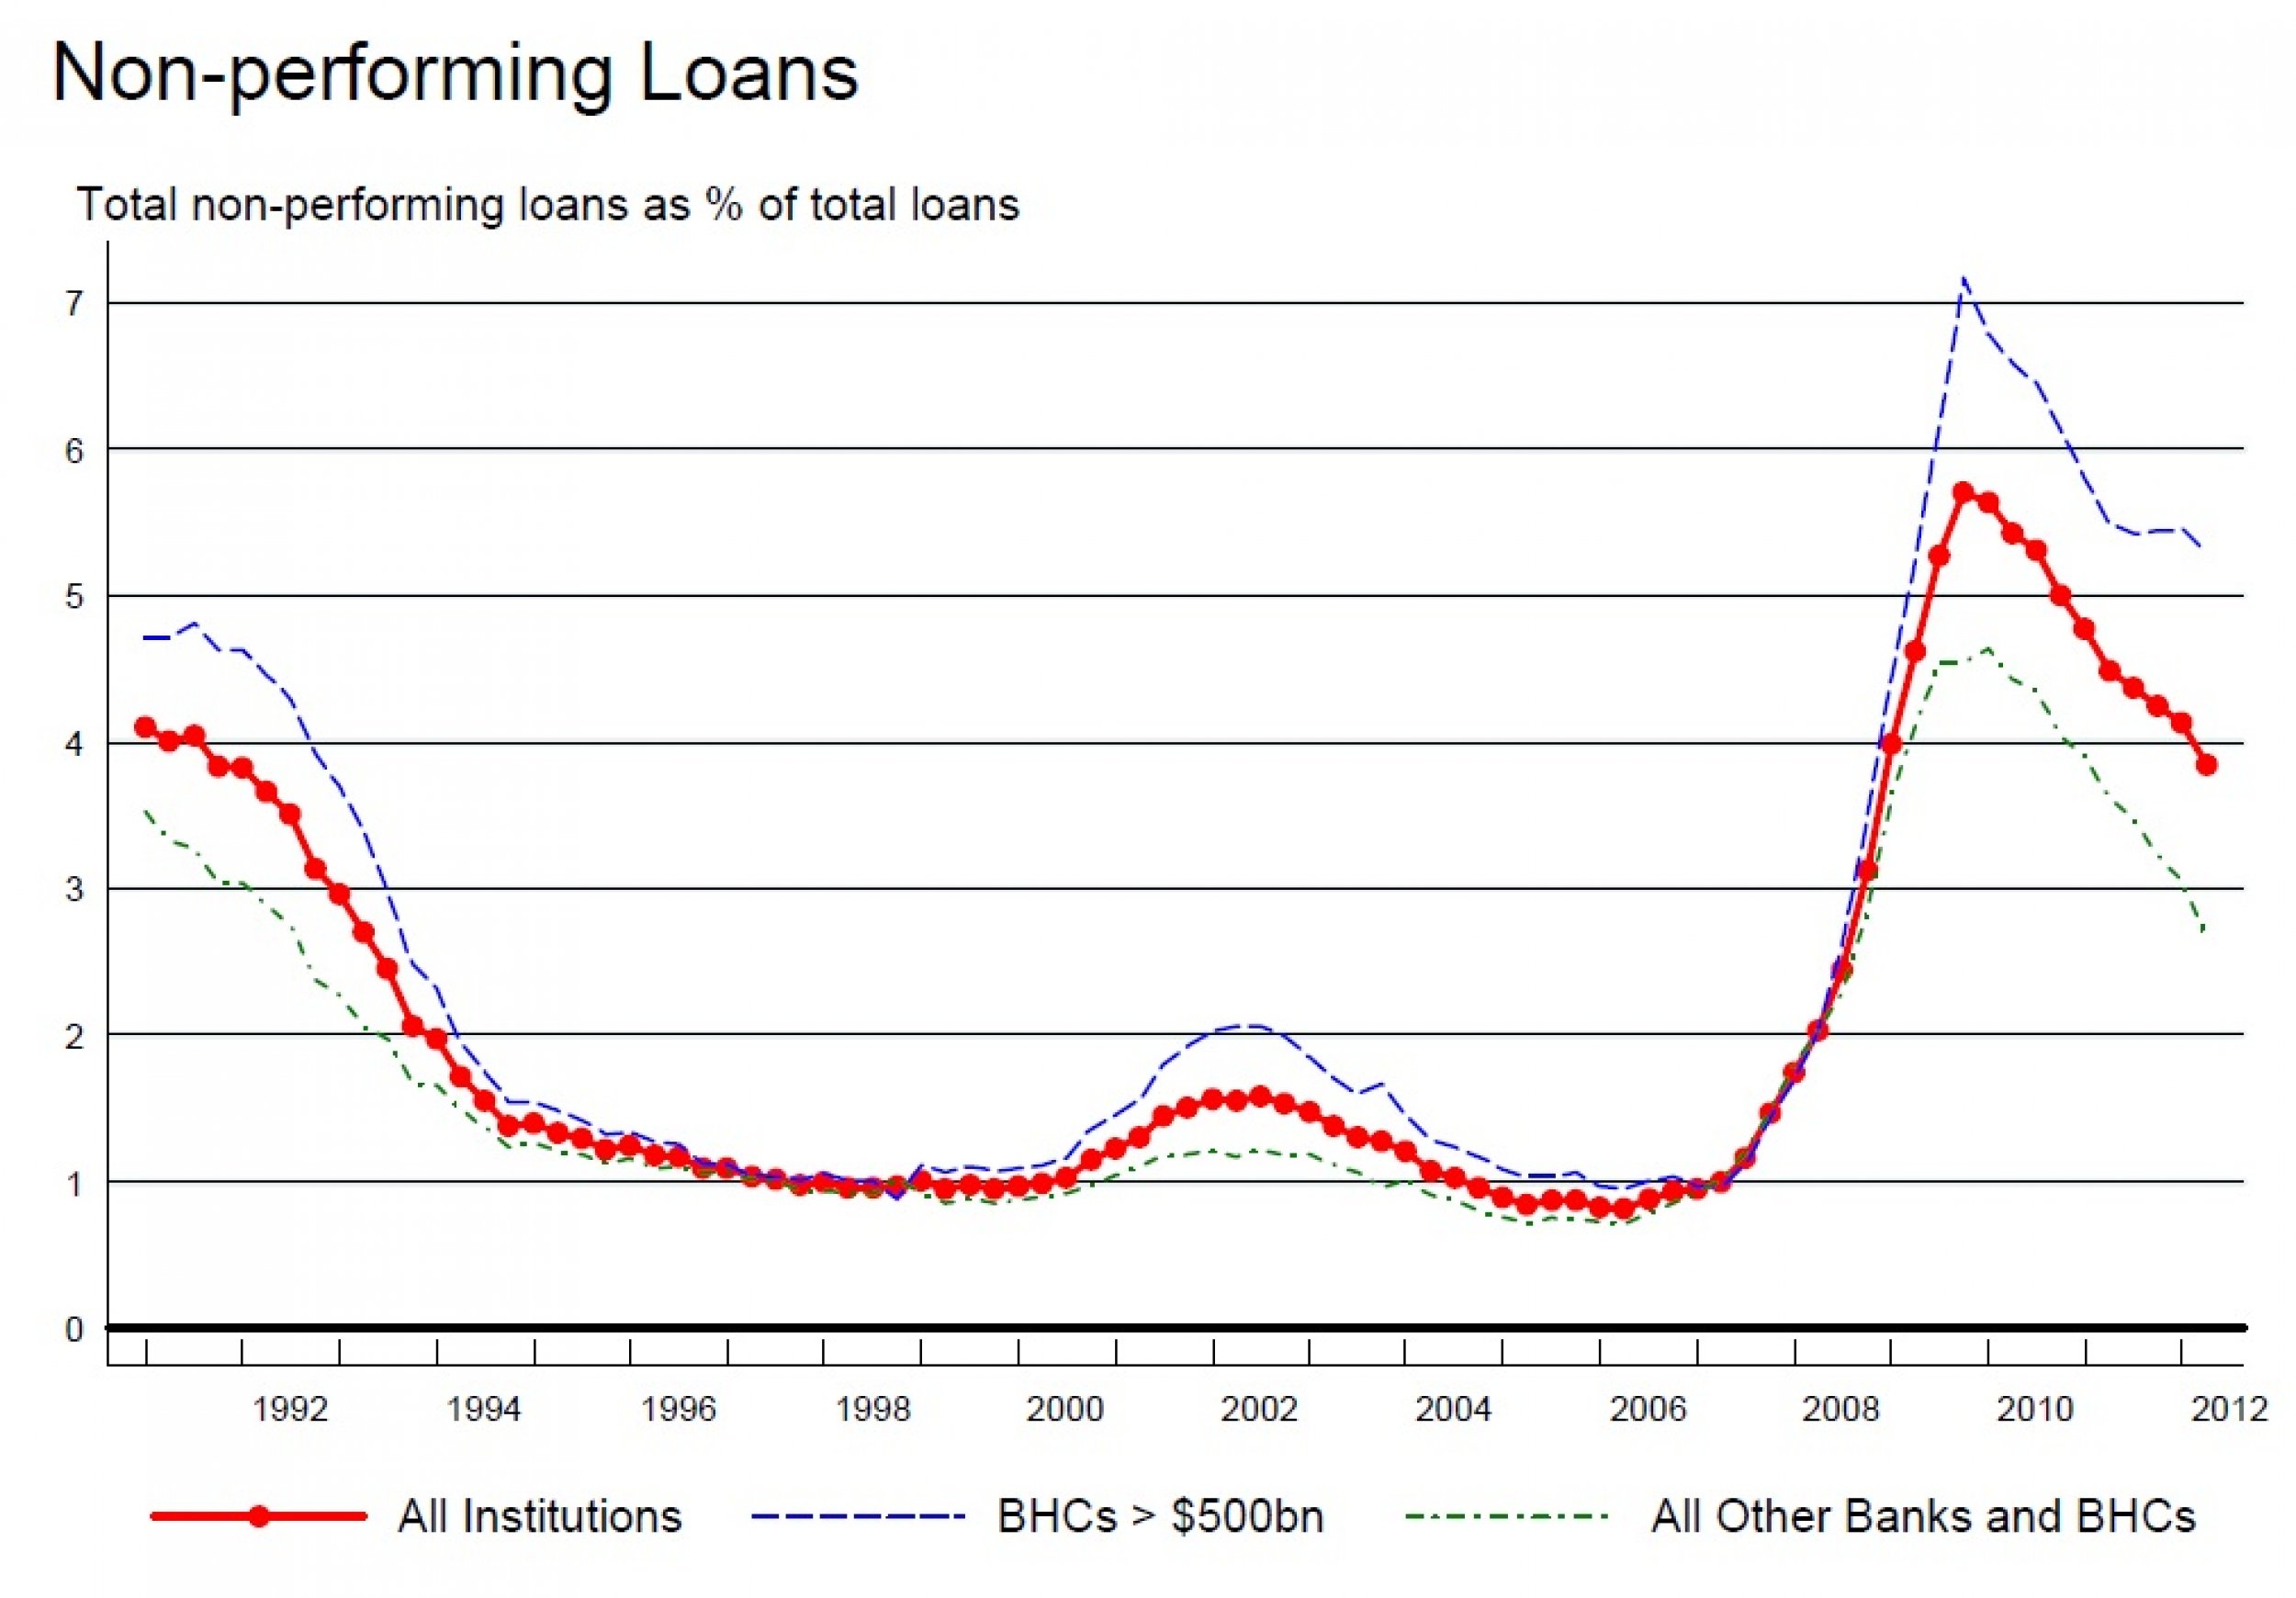 Part of the reason has been the divergence in the amount of non-performing loans. Big banks seem to have a larger number of those when compared to the industry as a whole.